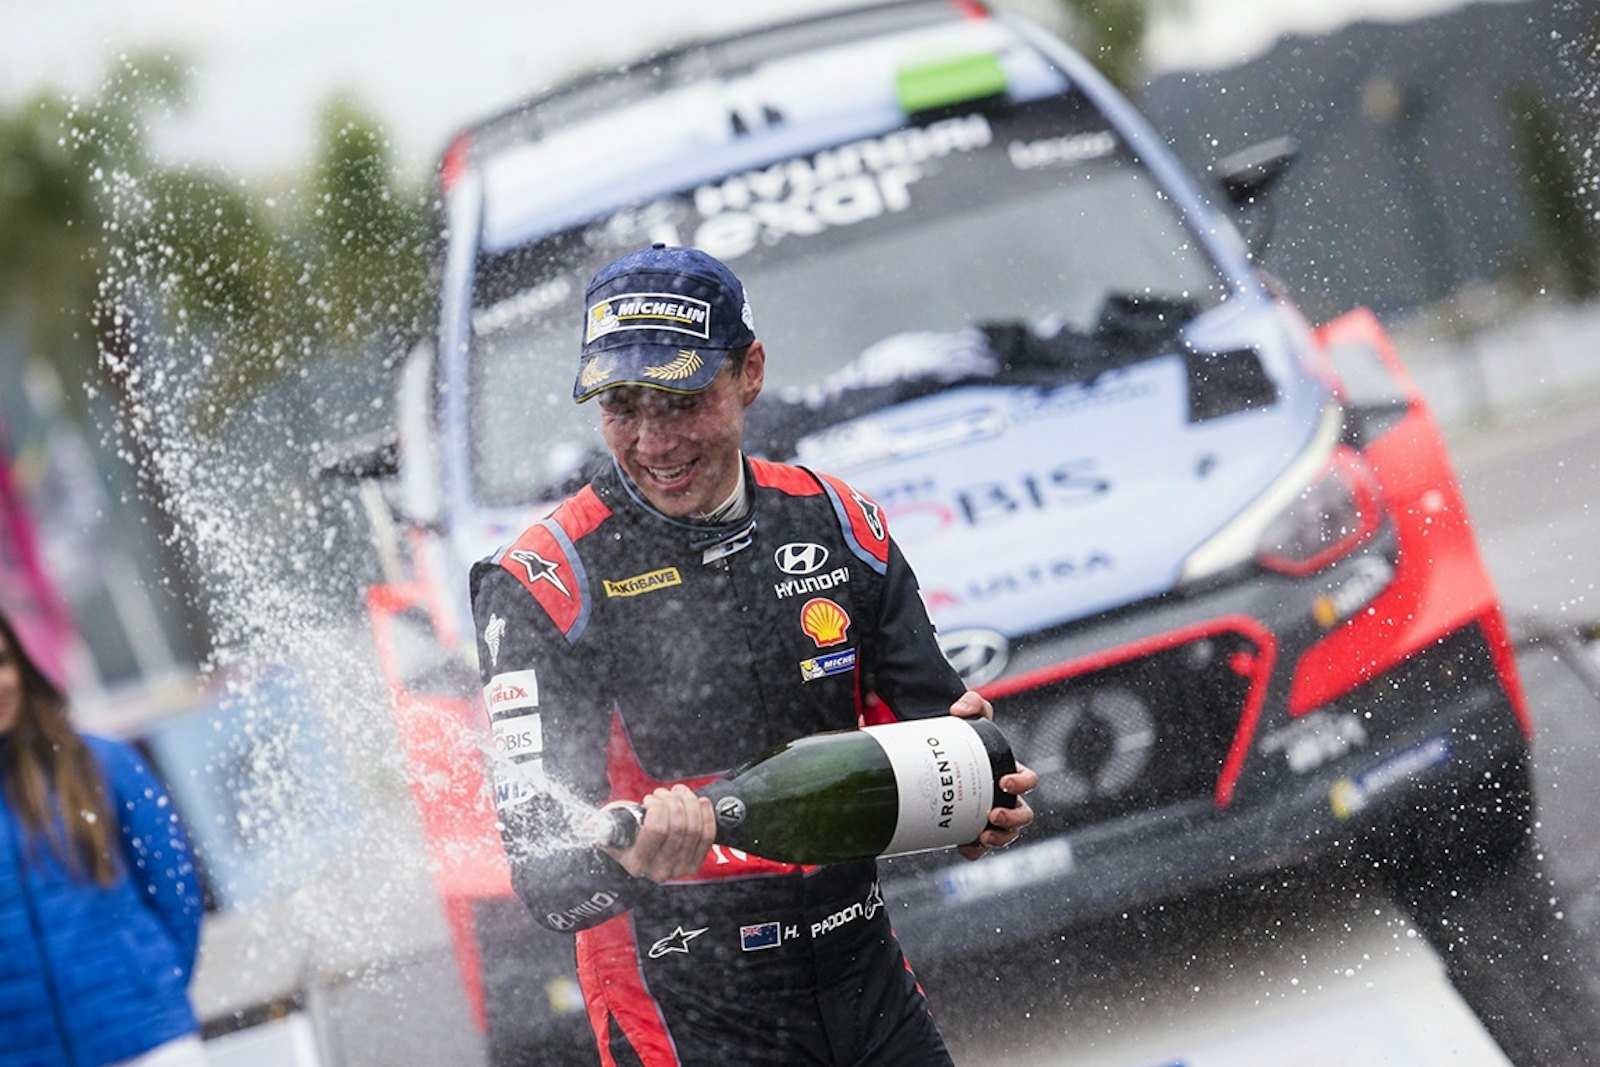 Hayden Paddon(NZL) celebrates the podium during  the FIA World Rally Championship Argentina 2016 in Cordoba, Argentina on April 24, 2016 // Jaanus Ree/Red Bull Content Pool // P-20160424-00833 // Usage for editorial use only // Please go to www.redbullcontentpool.com for further information. //